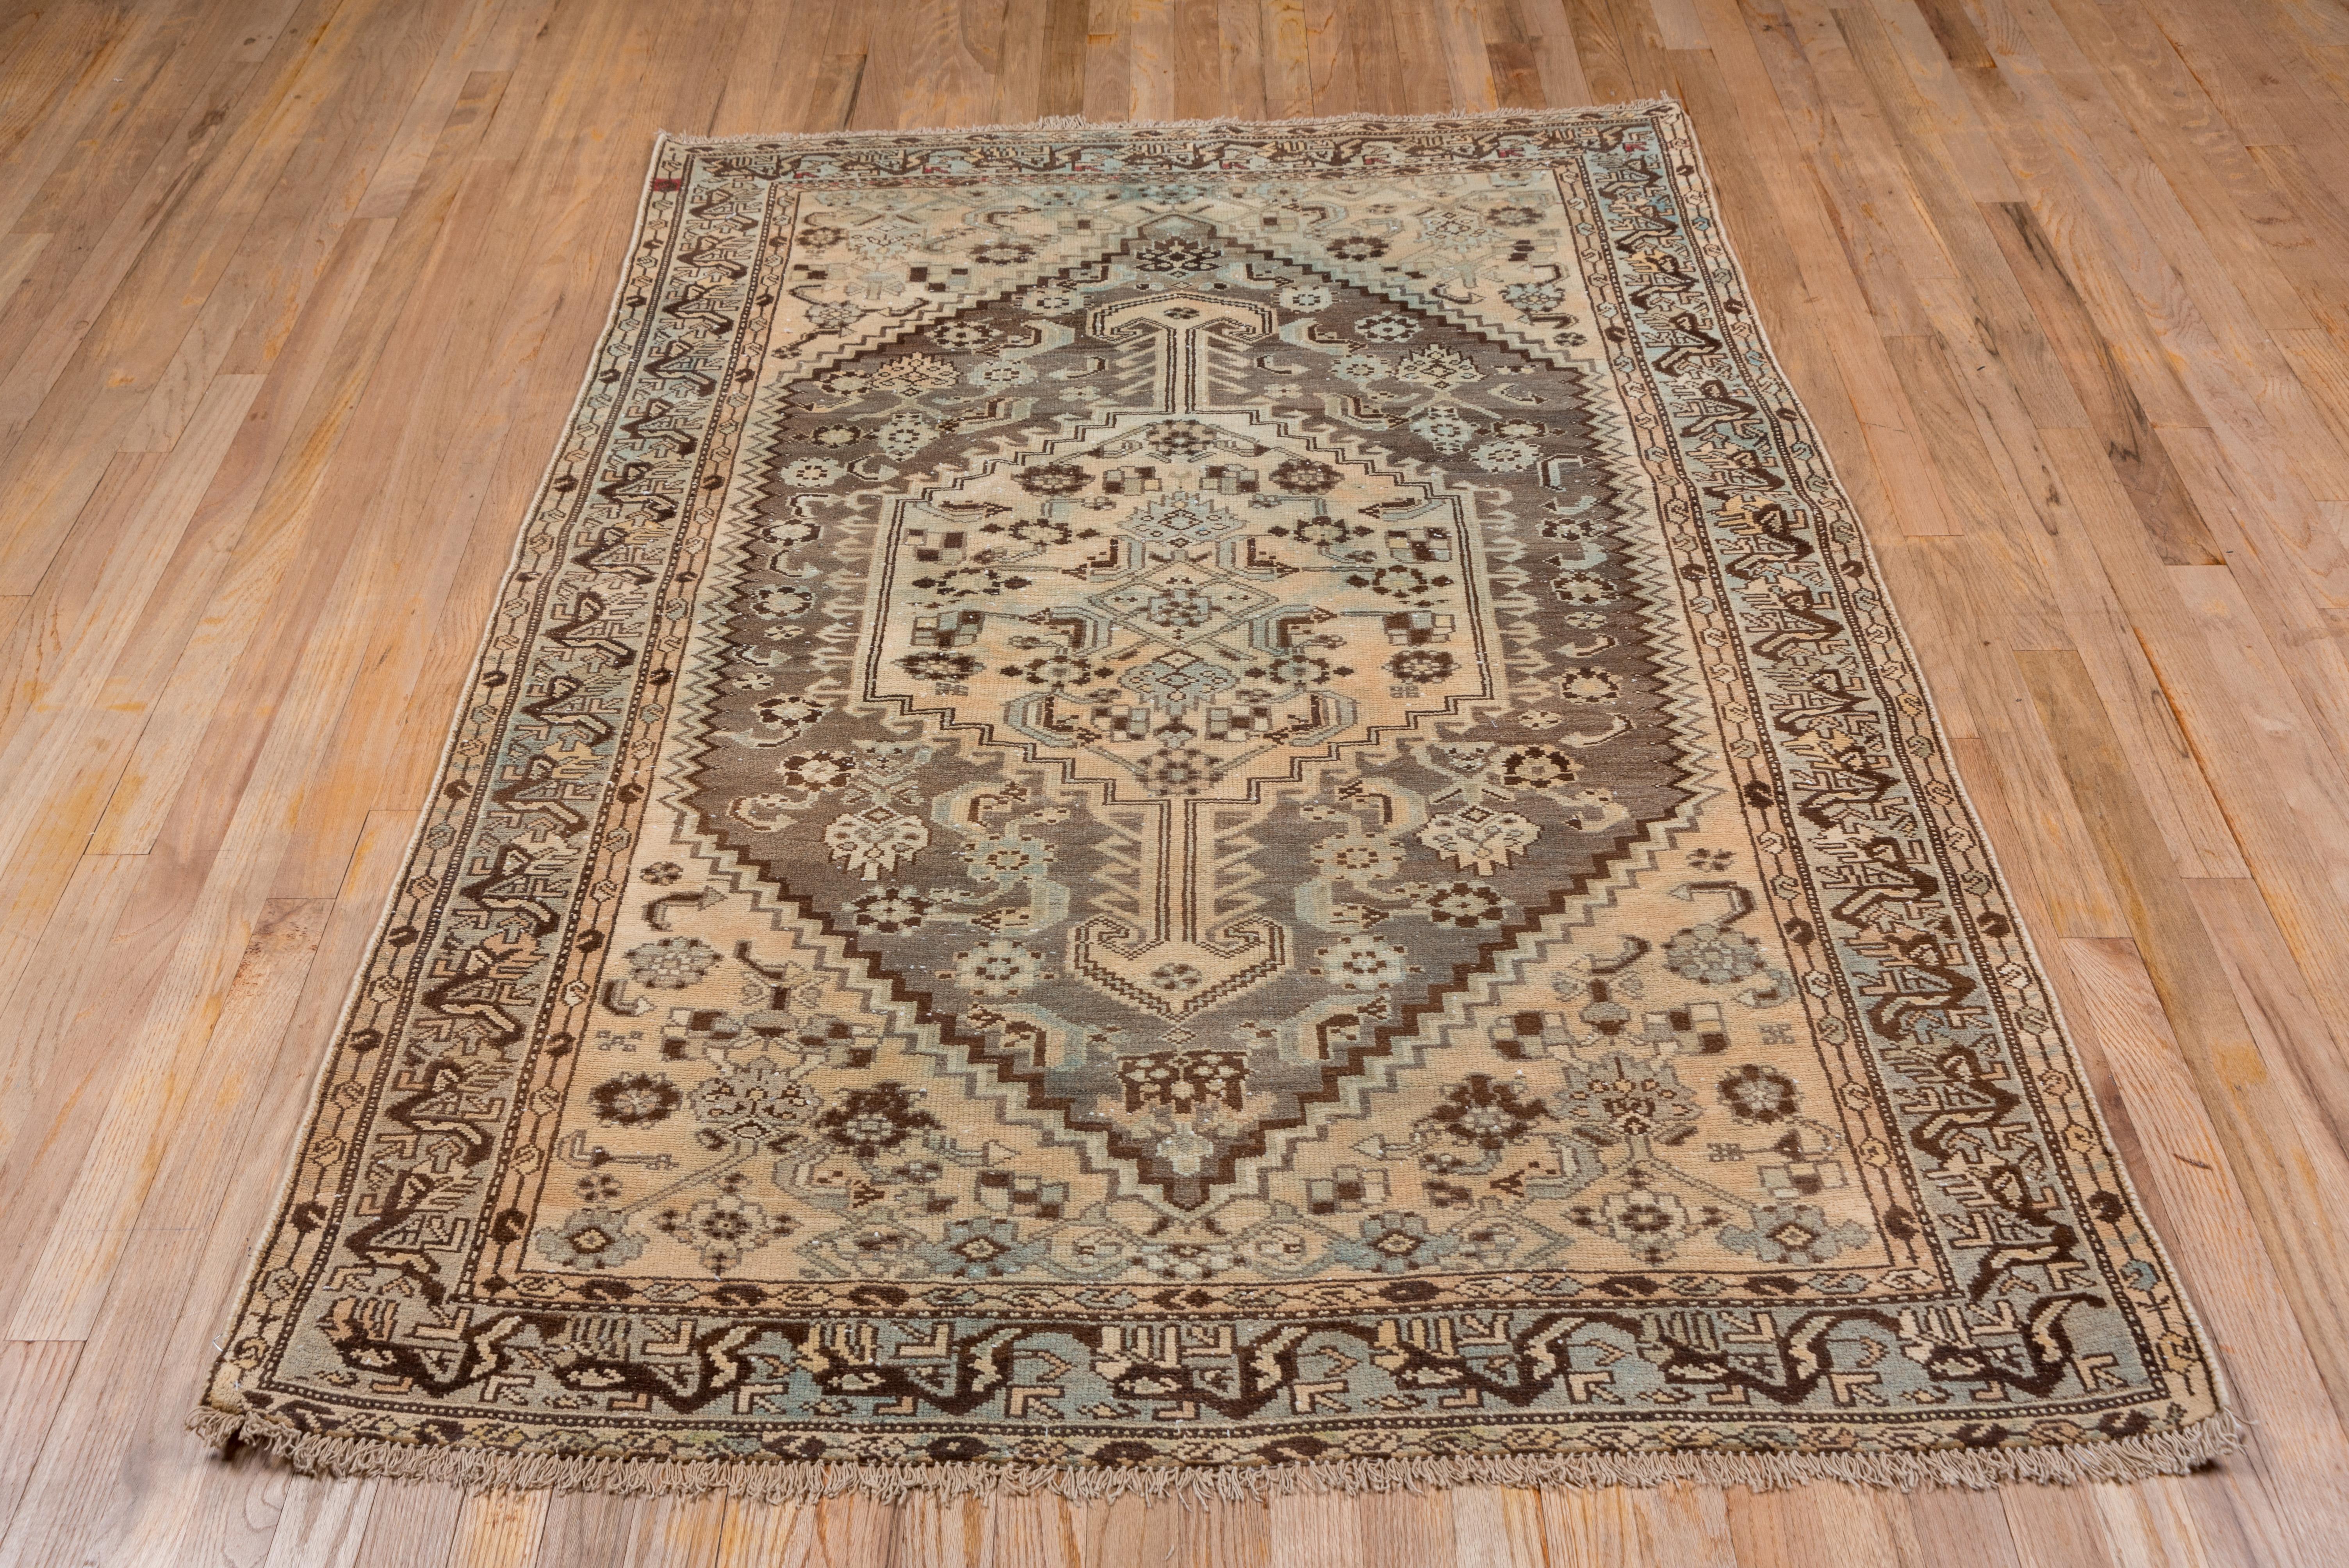 Tribal Pretty Antique Persian Shiraz Scatter Rug with Earth Tones, circa 1930s For Sale